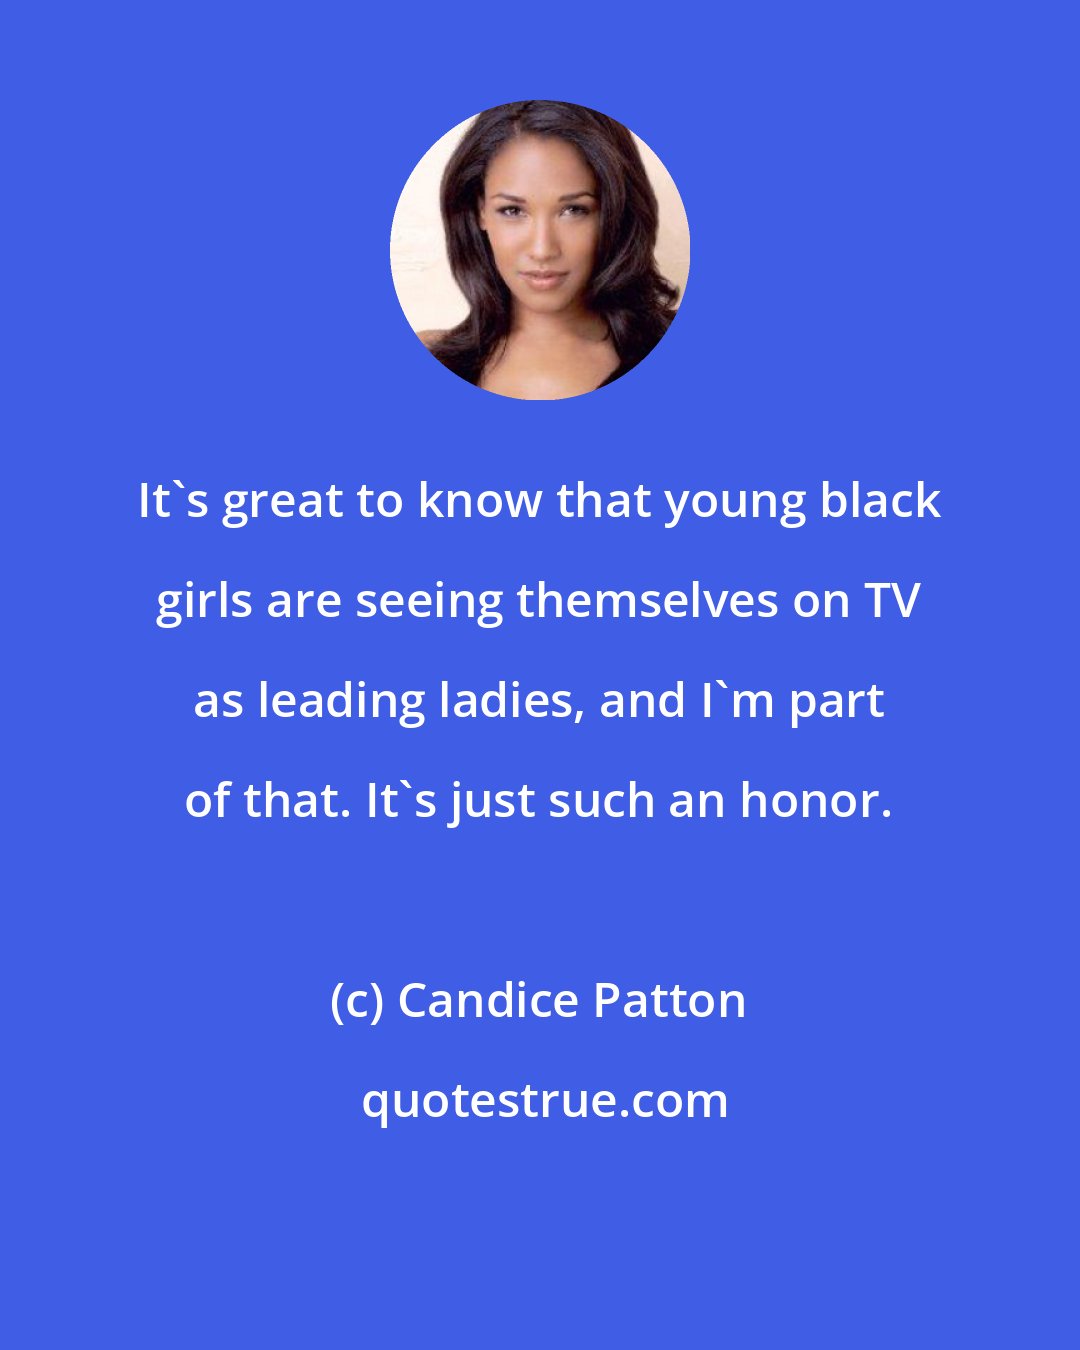 Candice Patton: It's great to know that young black girls are seeing themselves on TV as leading ladies, and I'm part of that. It's just such an honor.